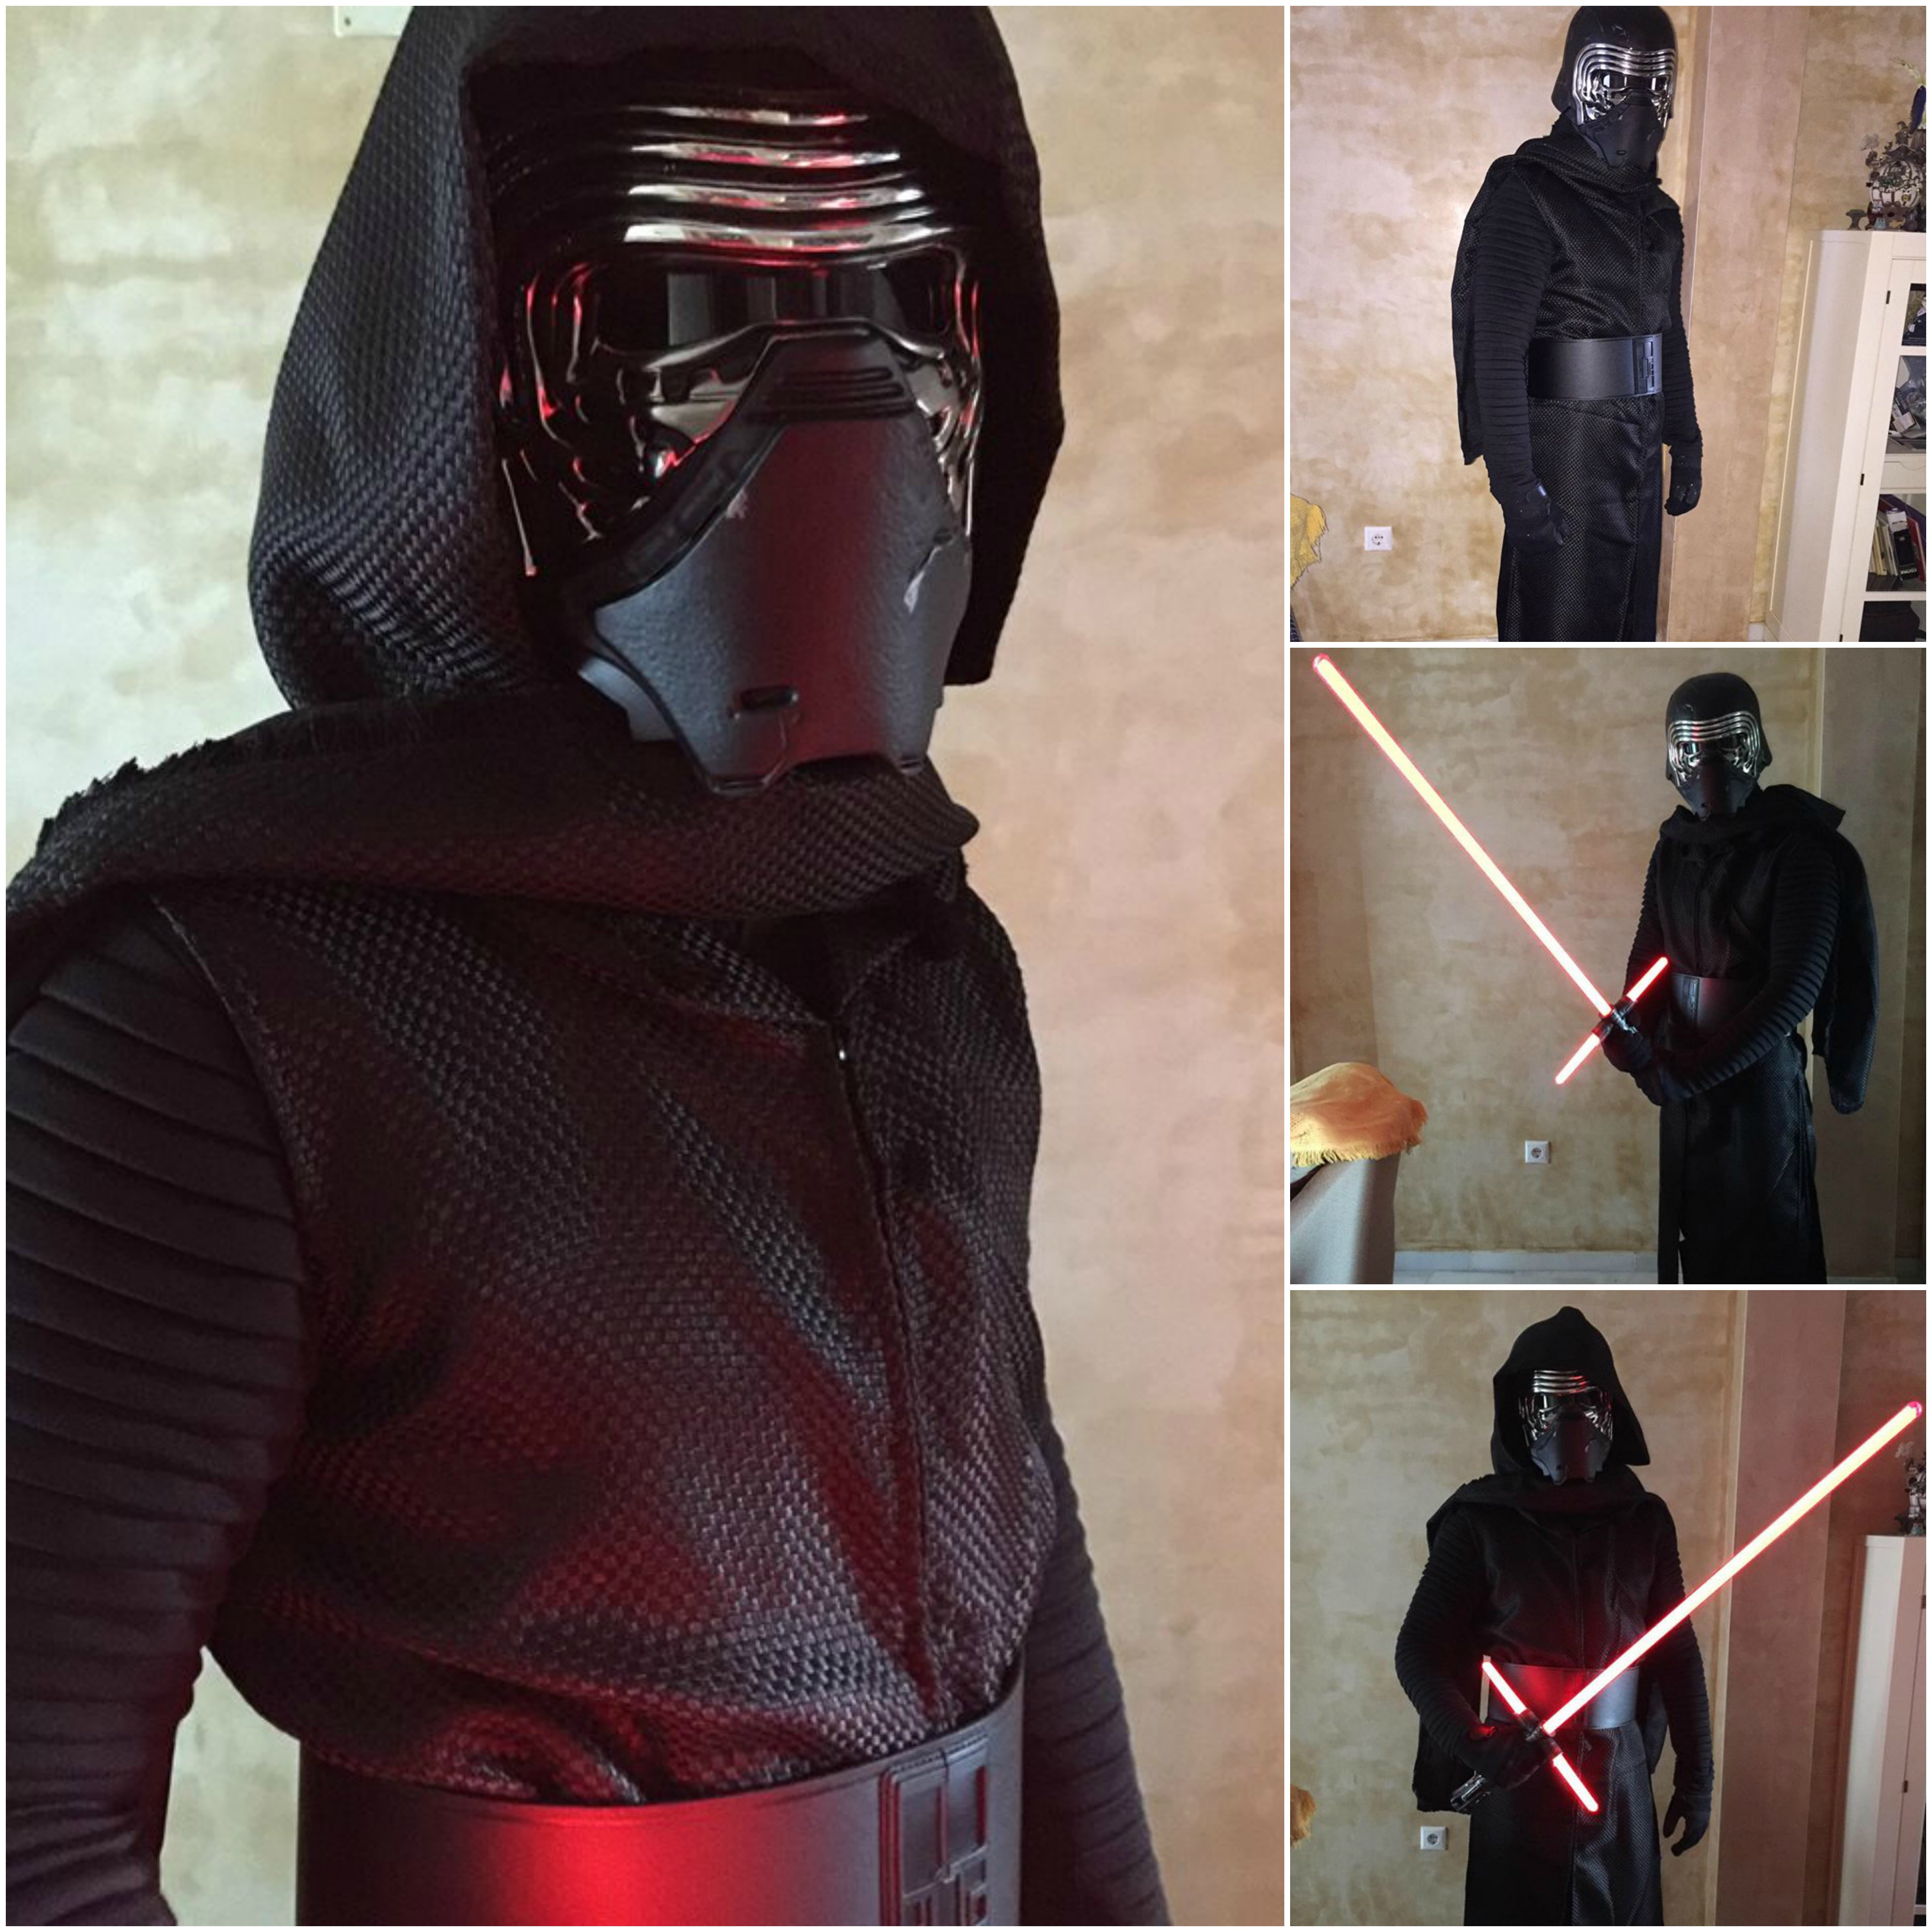 TFA Kylo Ren costume review by Jose